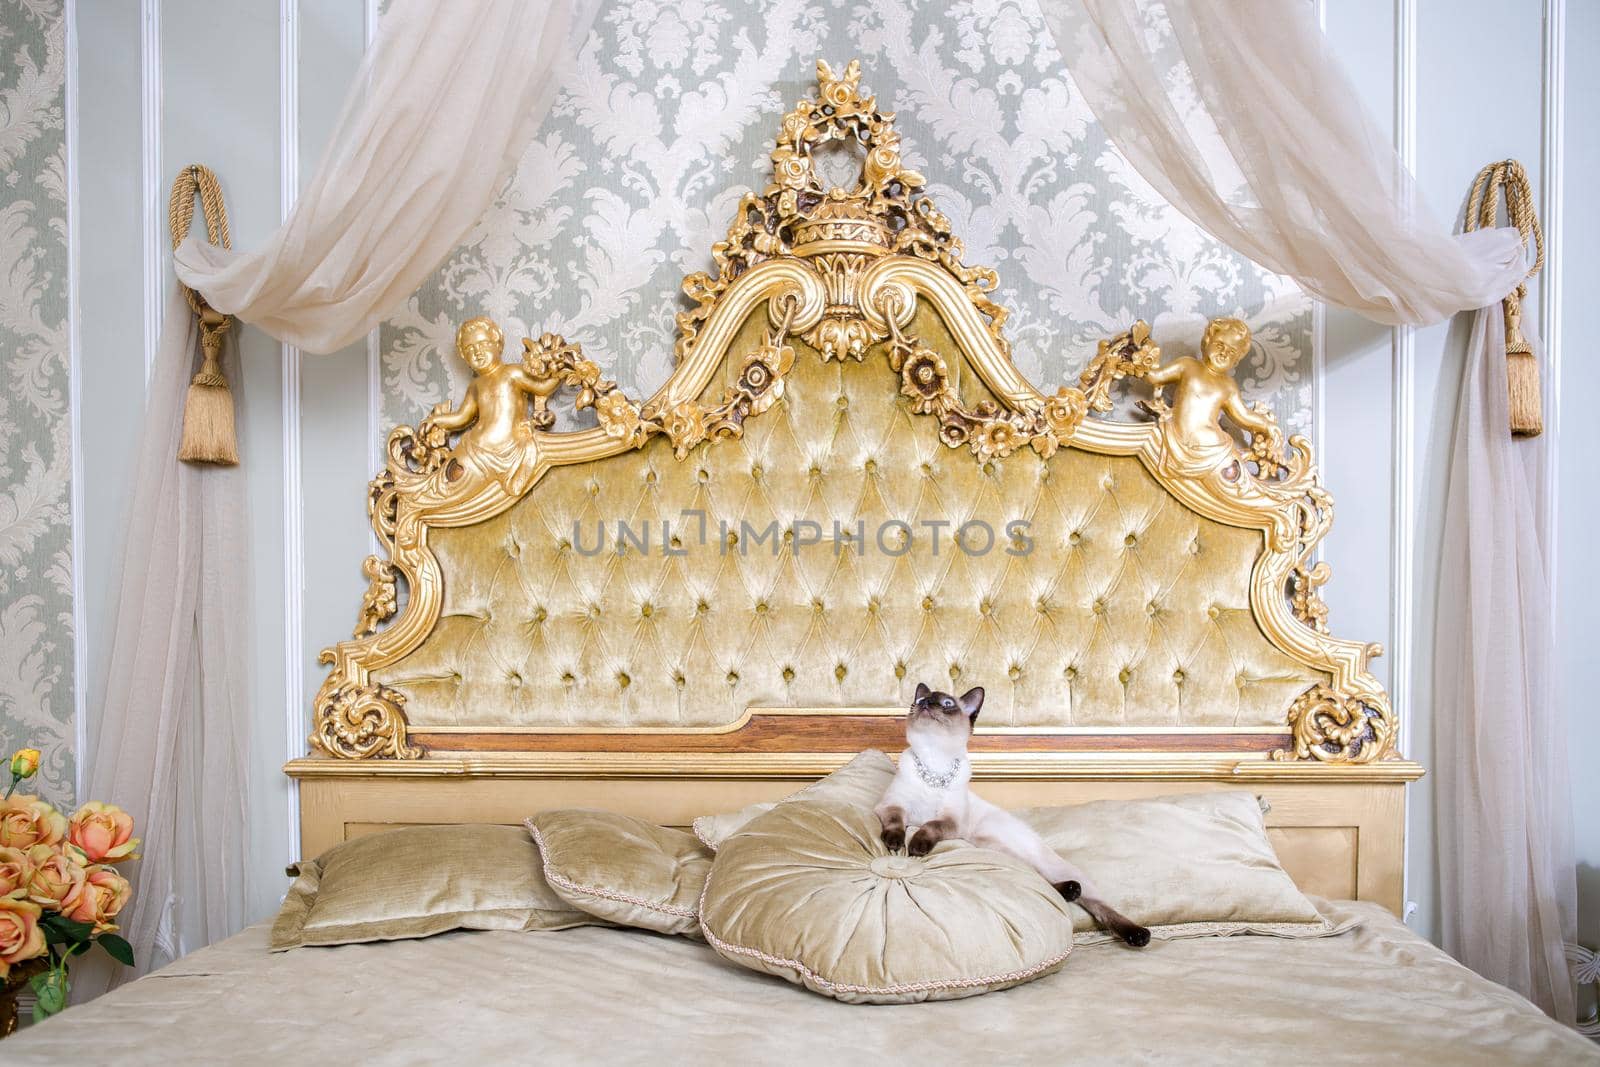 The theme is luxury and wealth. Young cat without a tail thoroughbred Mecogon bobtail lies resting on a big bed on a pillow in a Renaissance Baroque interior in France Europe Versailles Palace by Tomashevska